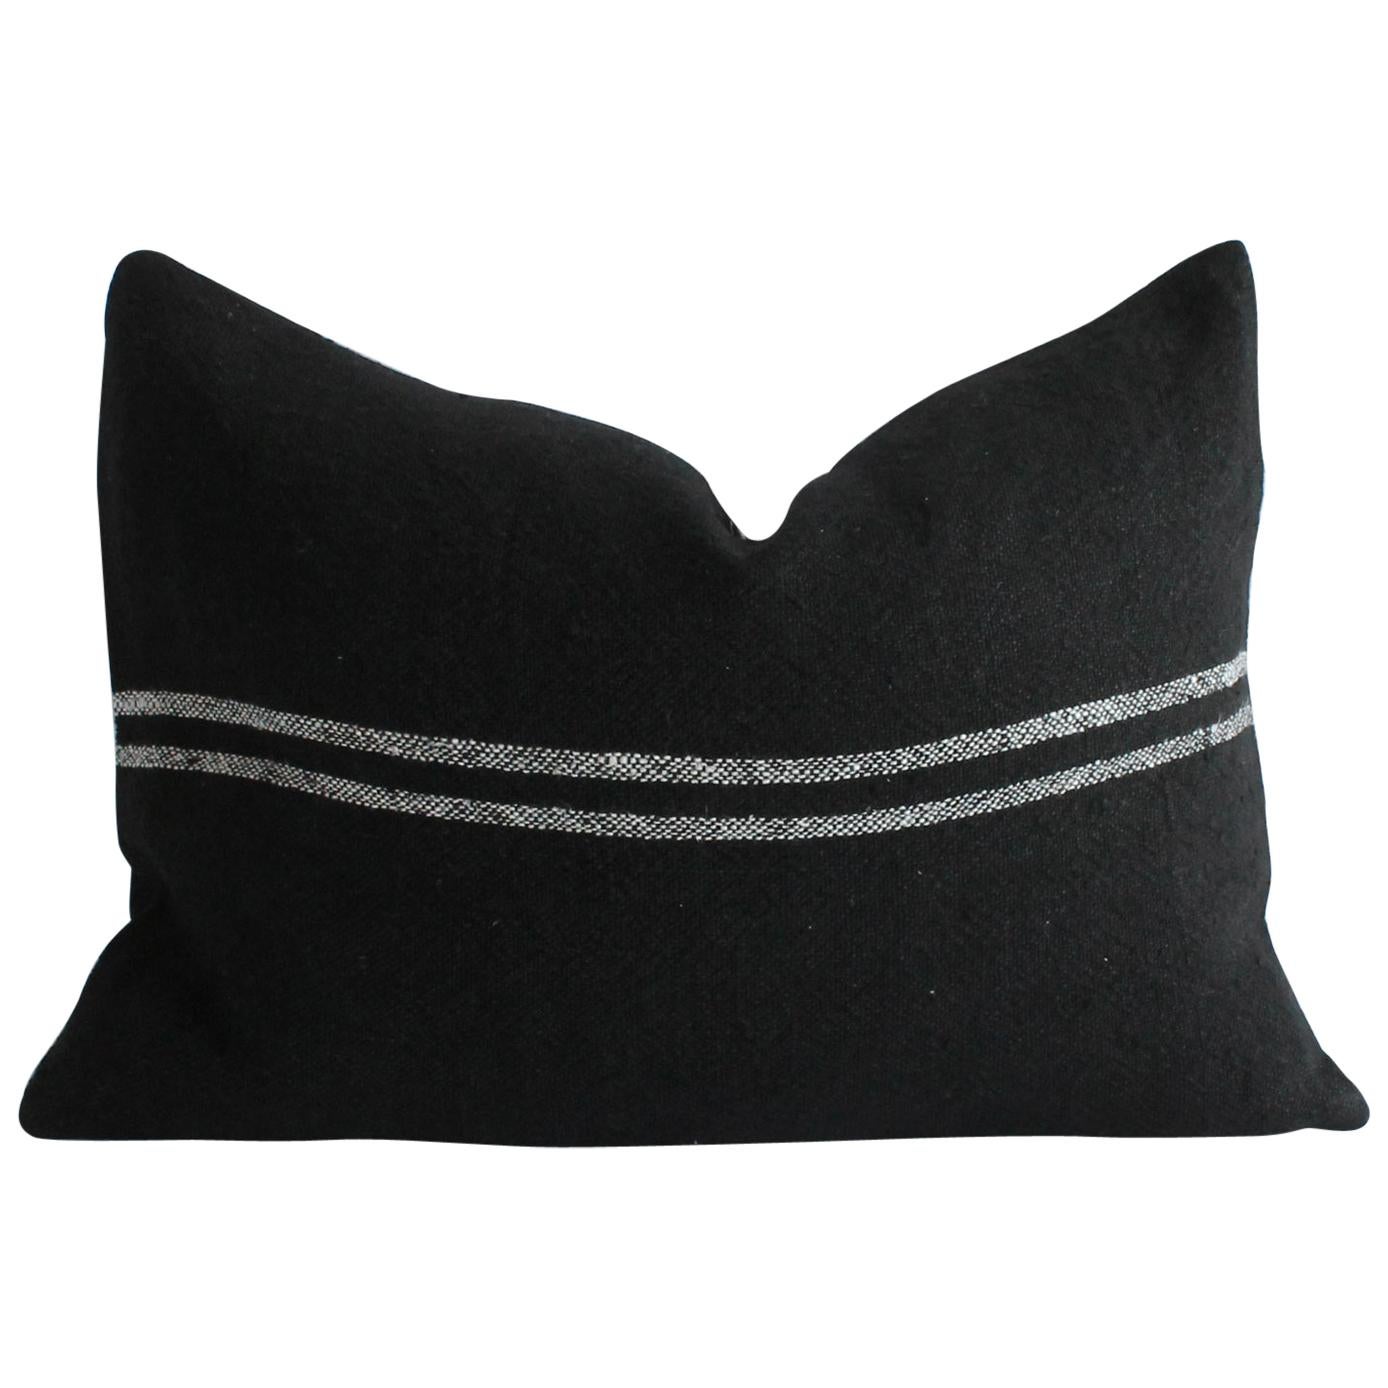 Black Linen Lumbar Pillow with Off-White Stripes